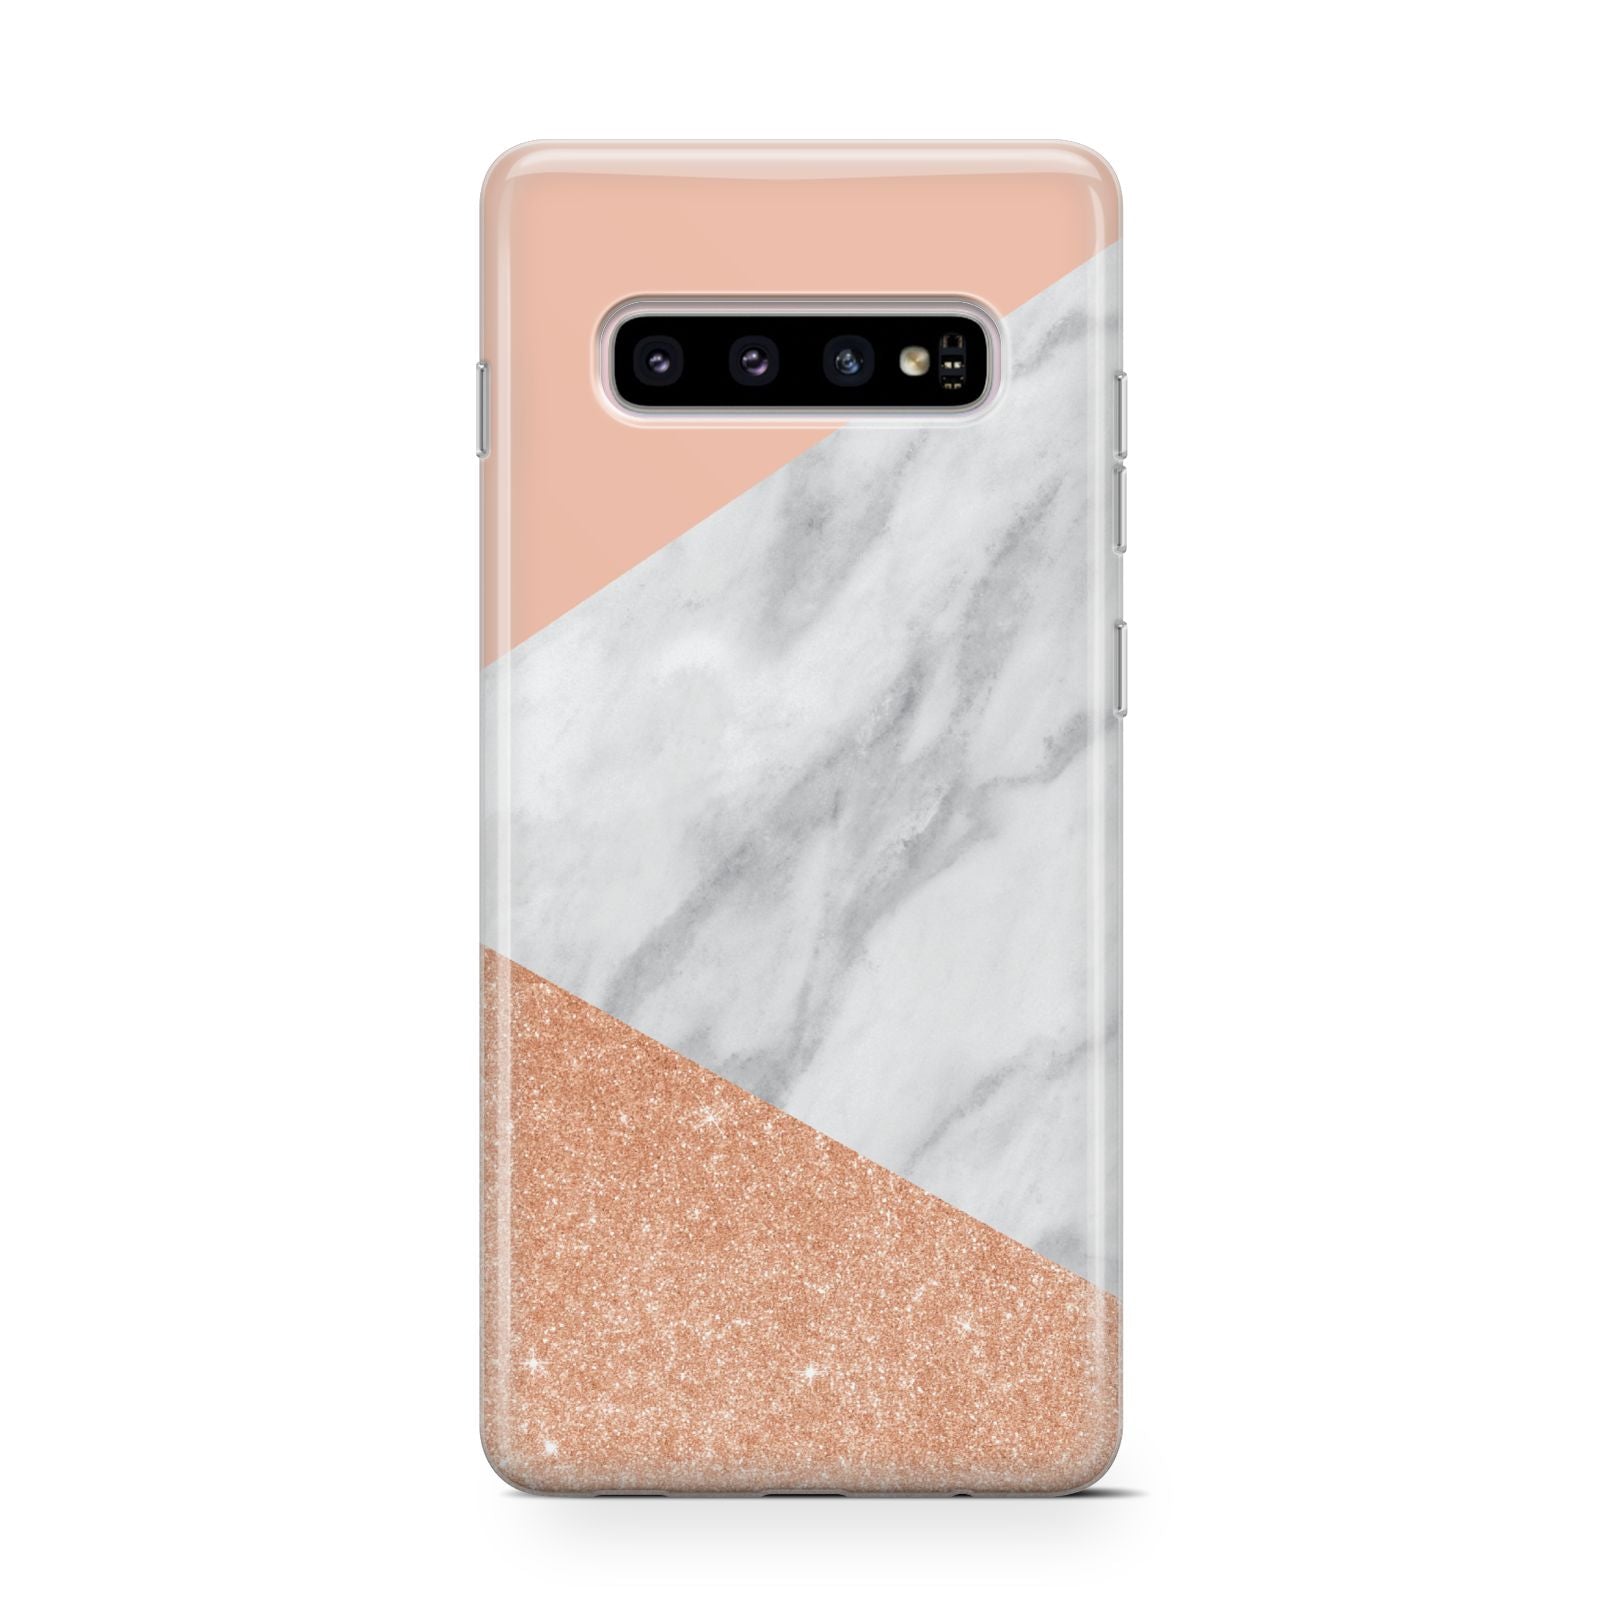 Marble Rose Gold Pink Samsung Galaxy S10 Case